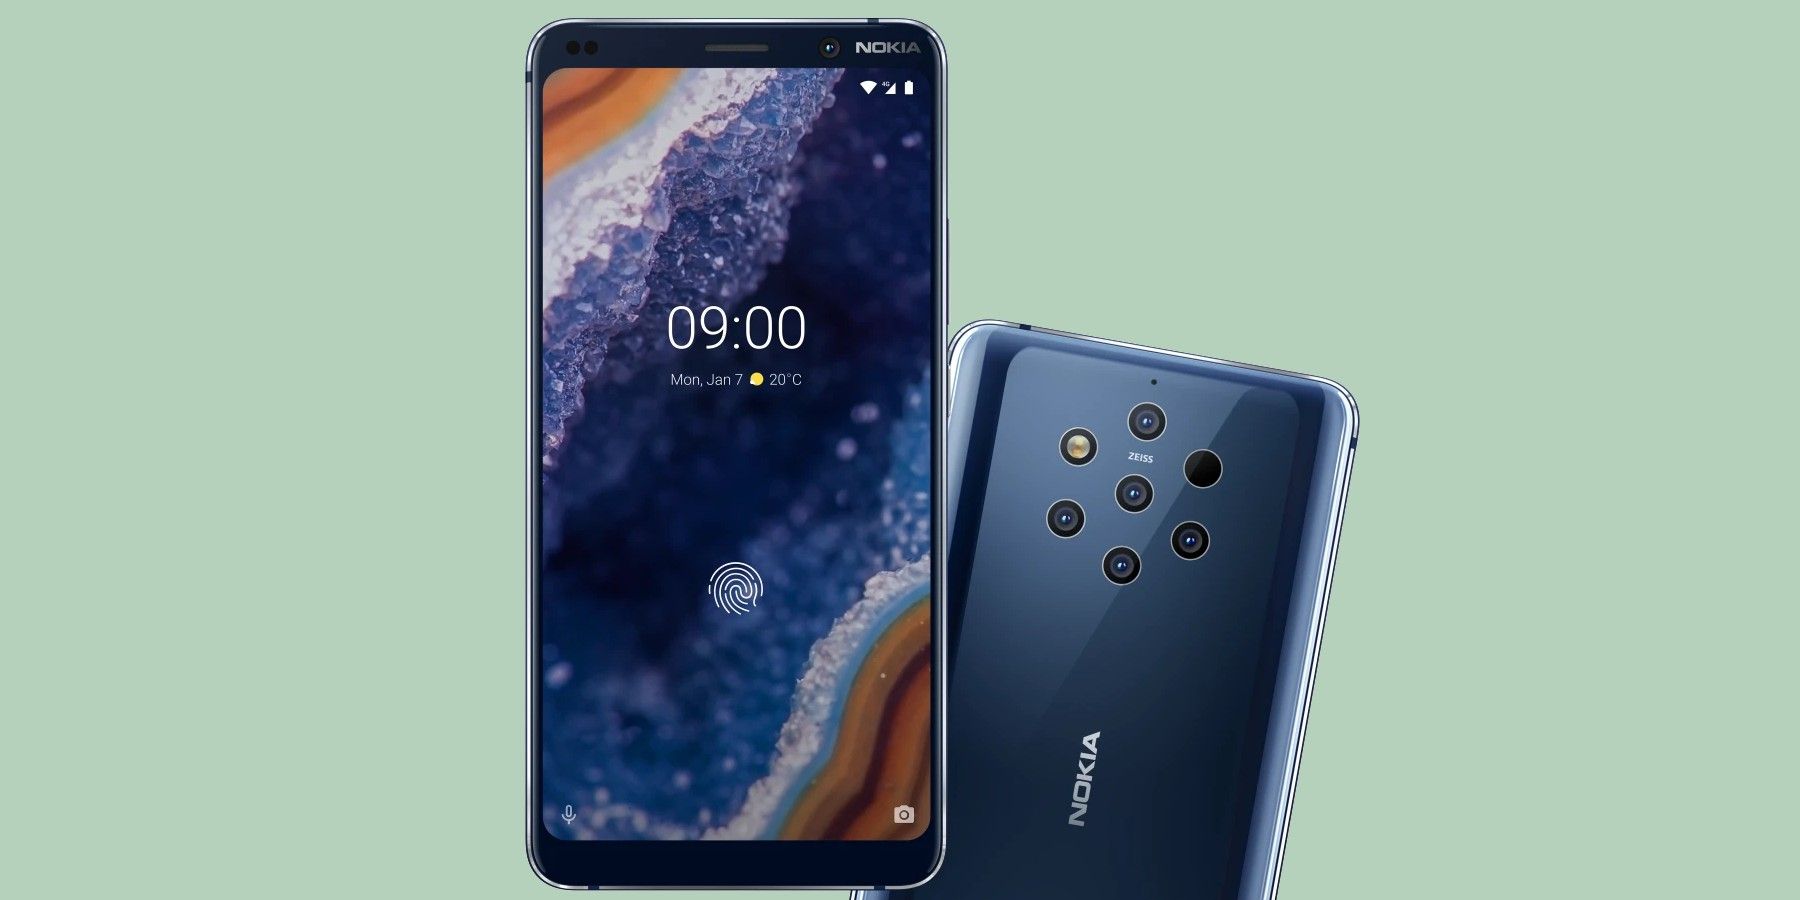 The Nokia 9 PureView won't get updated to Android 11